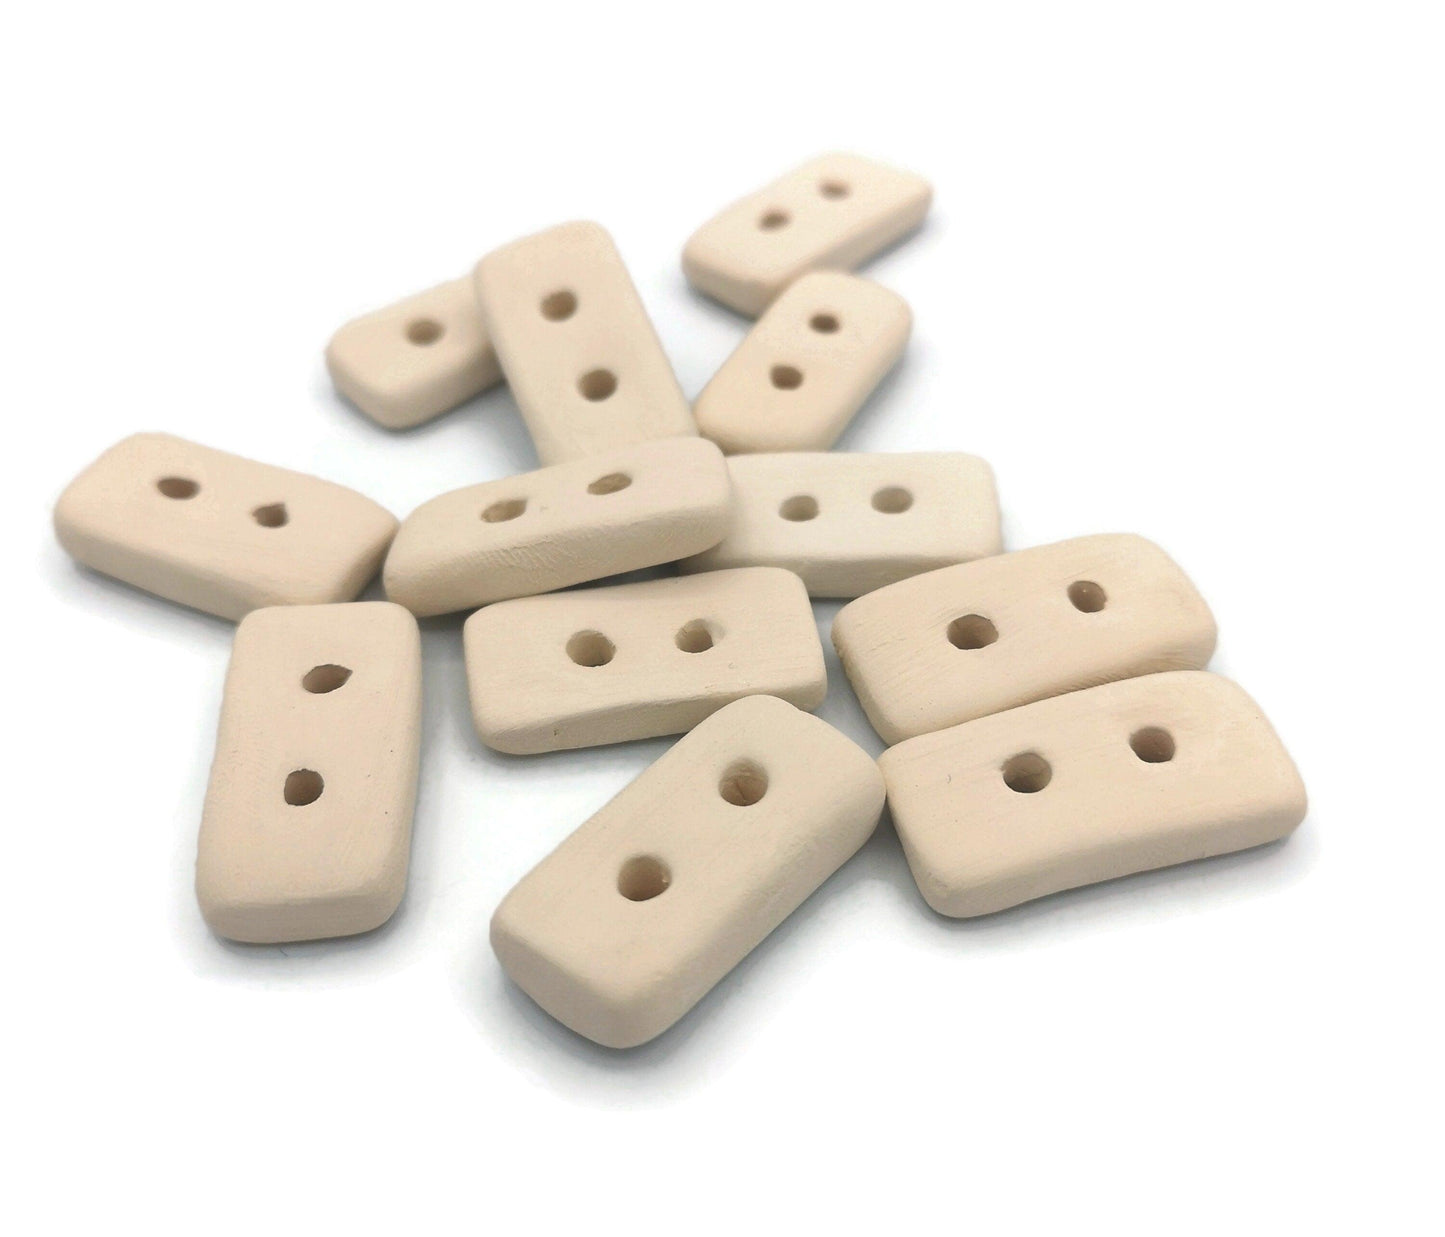 12Pc Handmade Ceramic Bisque Button lot Ready To Paint, Flatback Sewing Buttons For Coat, Unpainted Ceramics To Paint, Diy Craft Kit - Ceramica Ana Rafael